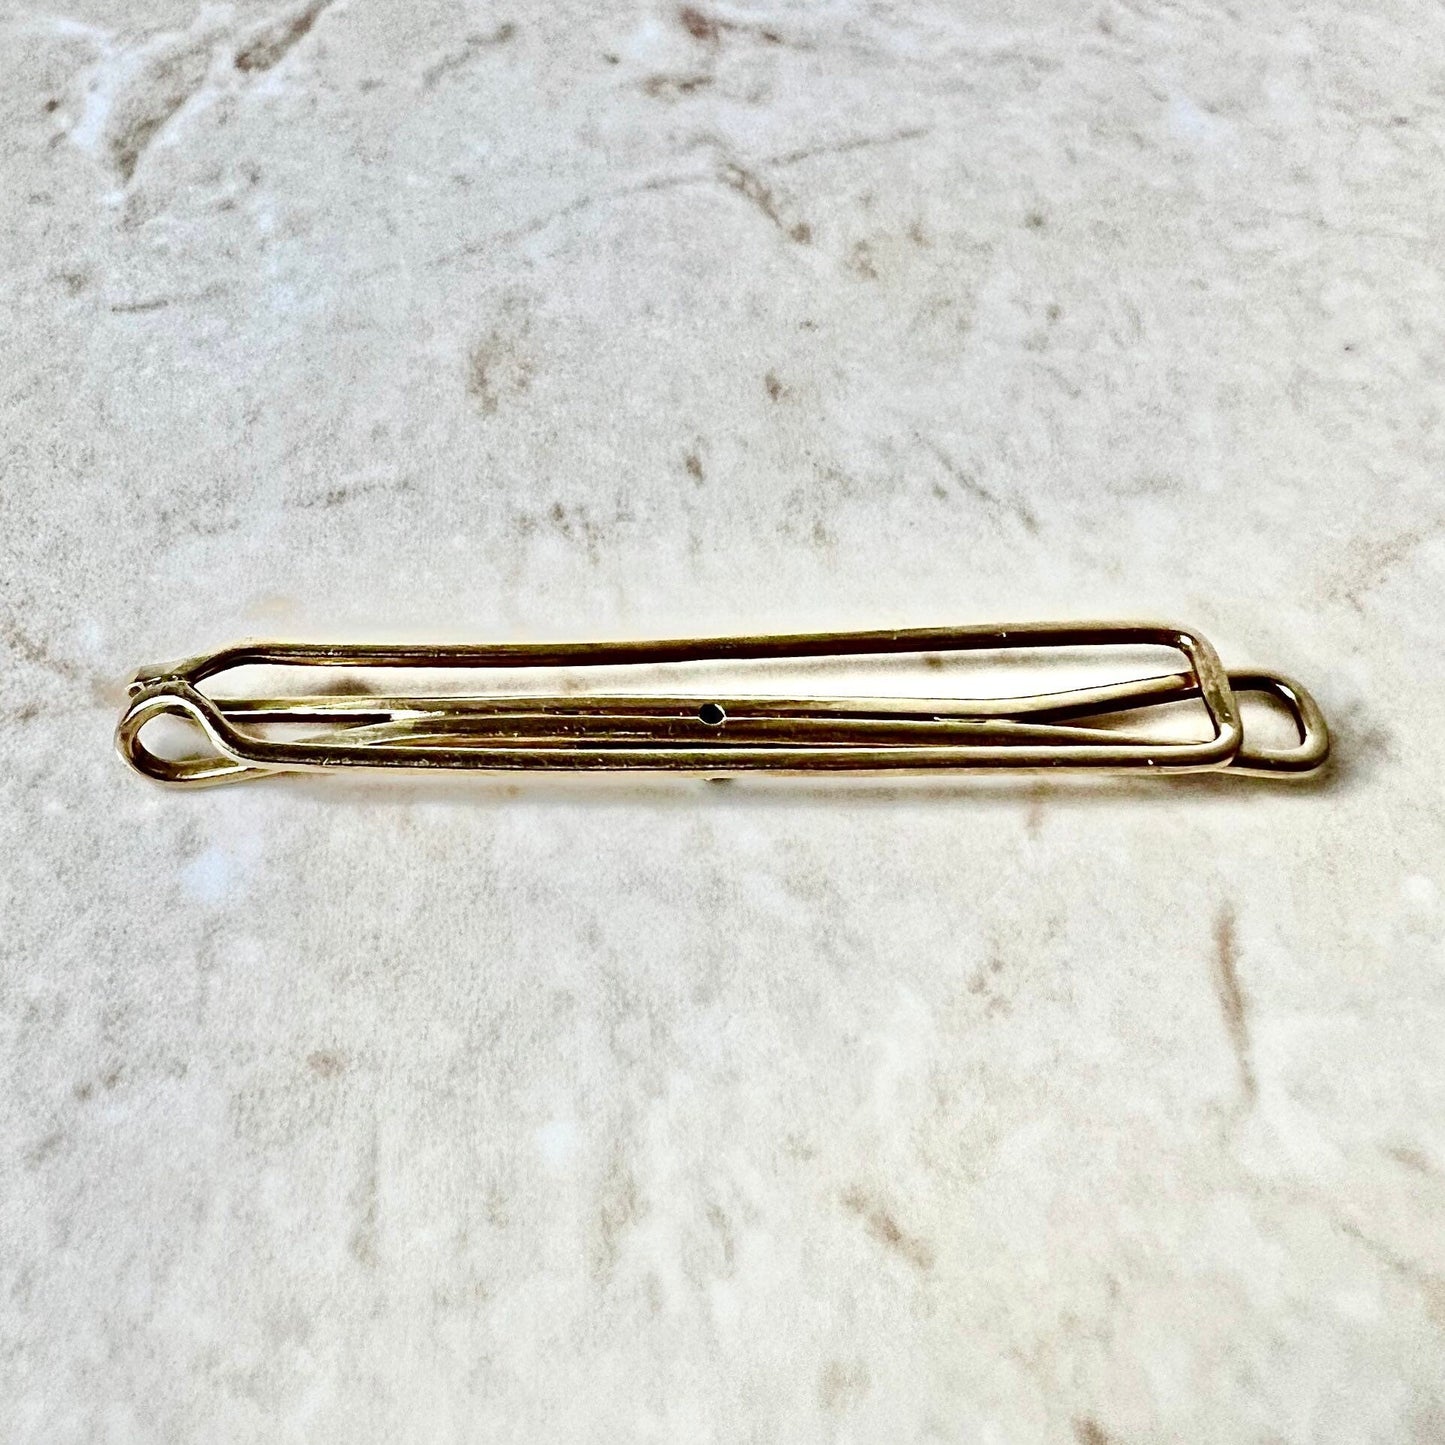 14K Antique Tie Clip - Diamond Tie Bar - Yellow Gold Tie Clip - Gold Tie Bar - Best Gifts For Him - Tie Accessories - Gifts for Dad